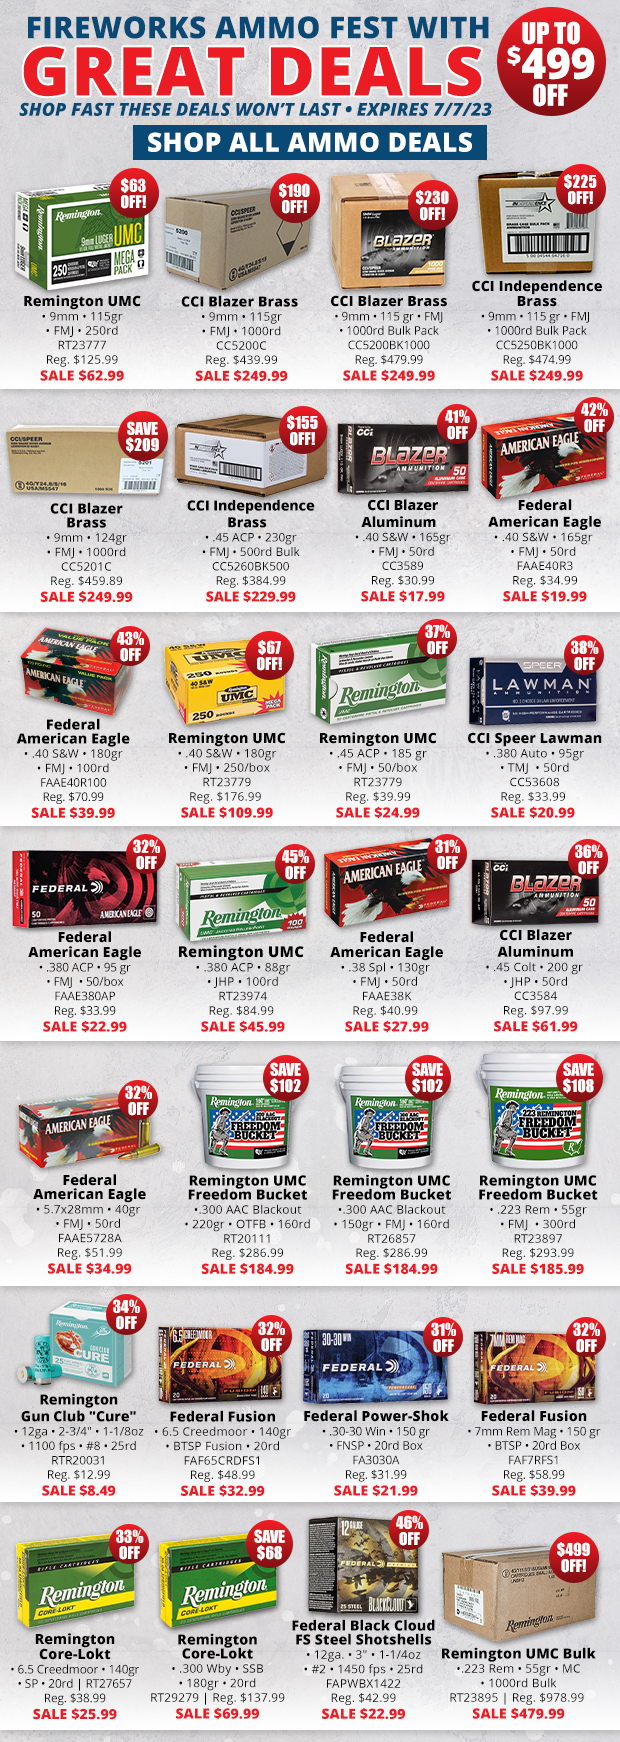 Firework Ammo Fest up to $499 Off!